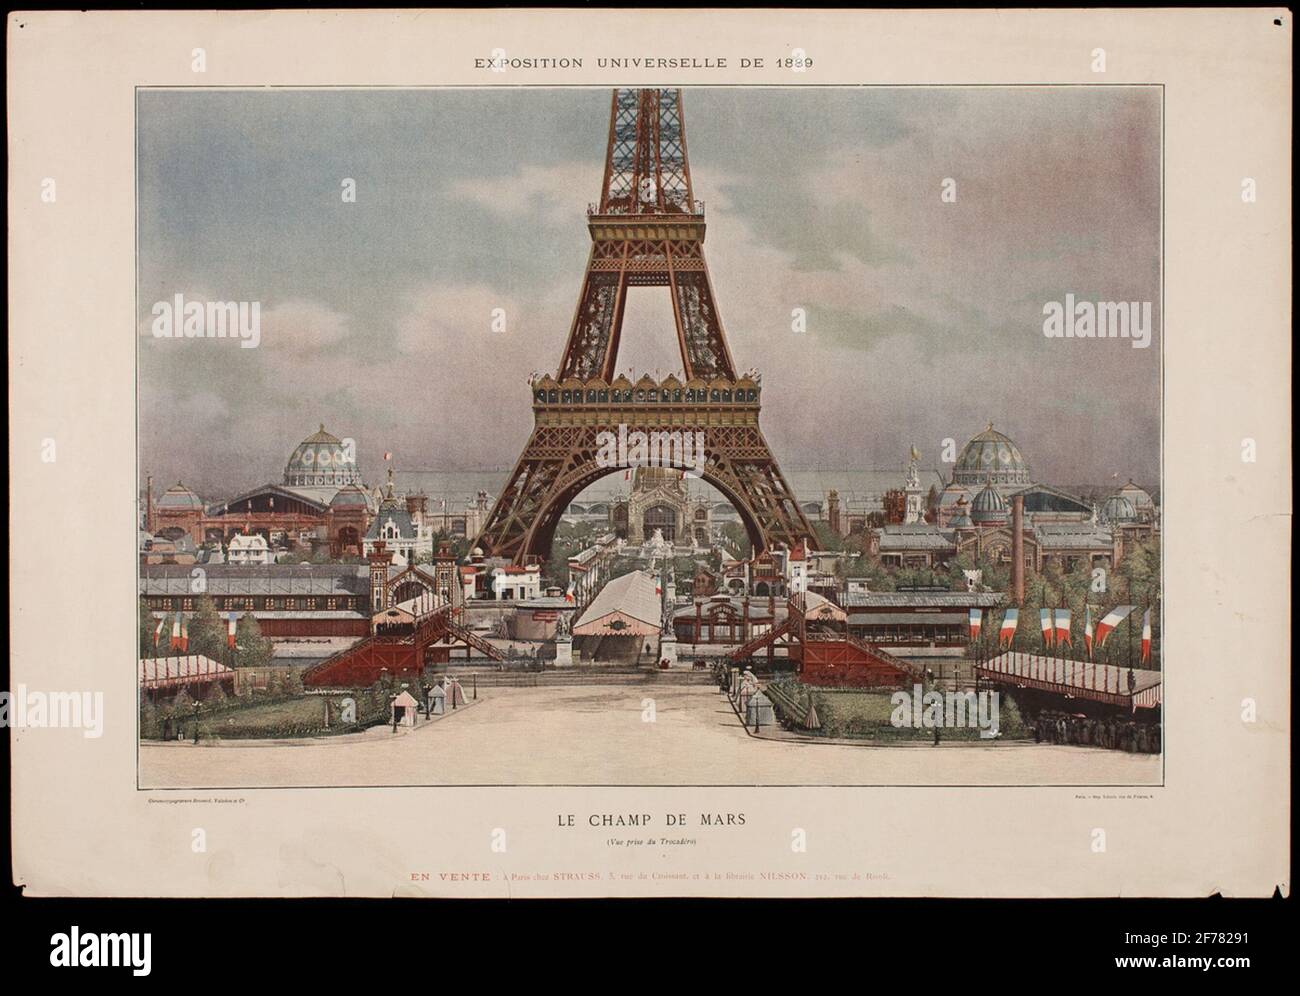 Painting with motives of etching the view of the world exhibition in 1889, Exposition Universal De 1889. View of the Eiffel Tower and Champ de Mars against Trocadero. Stock Photo